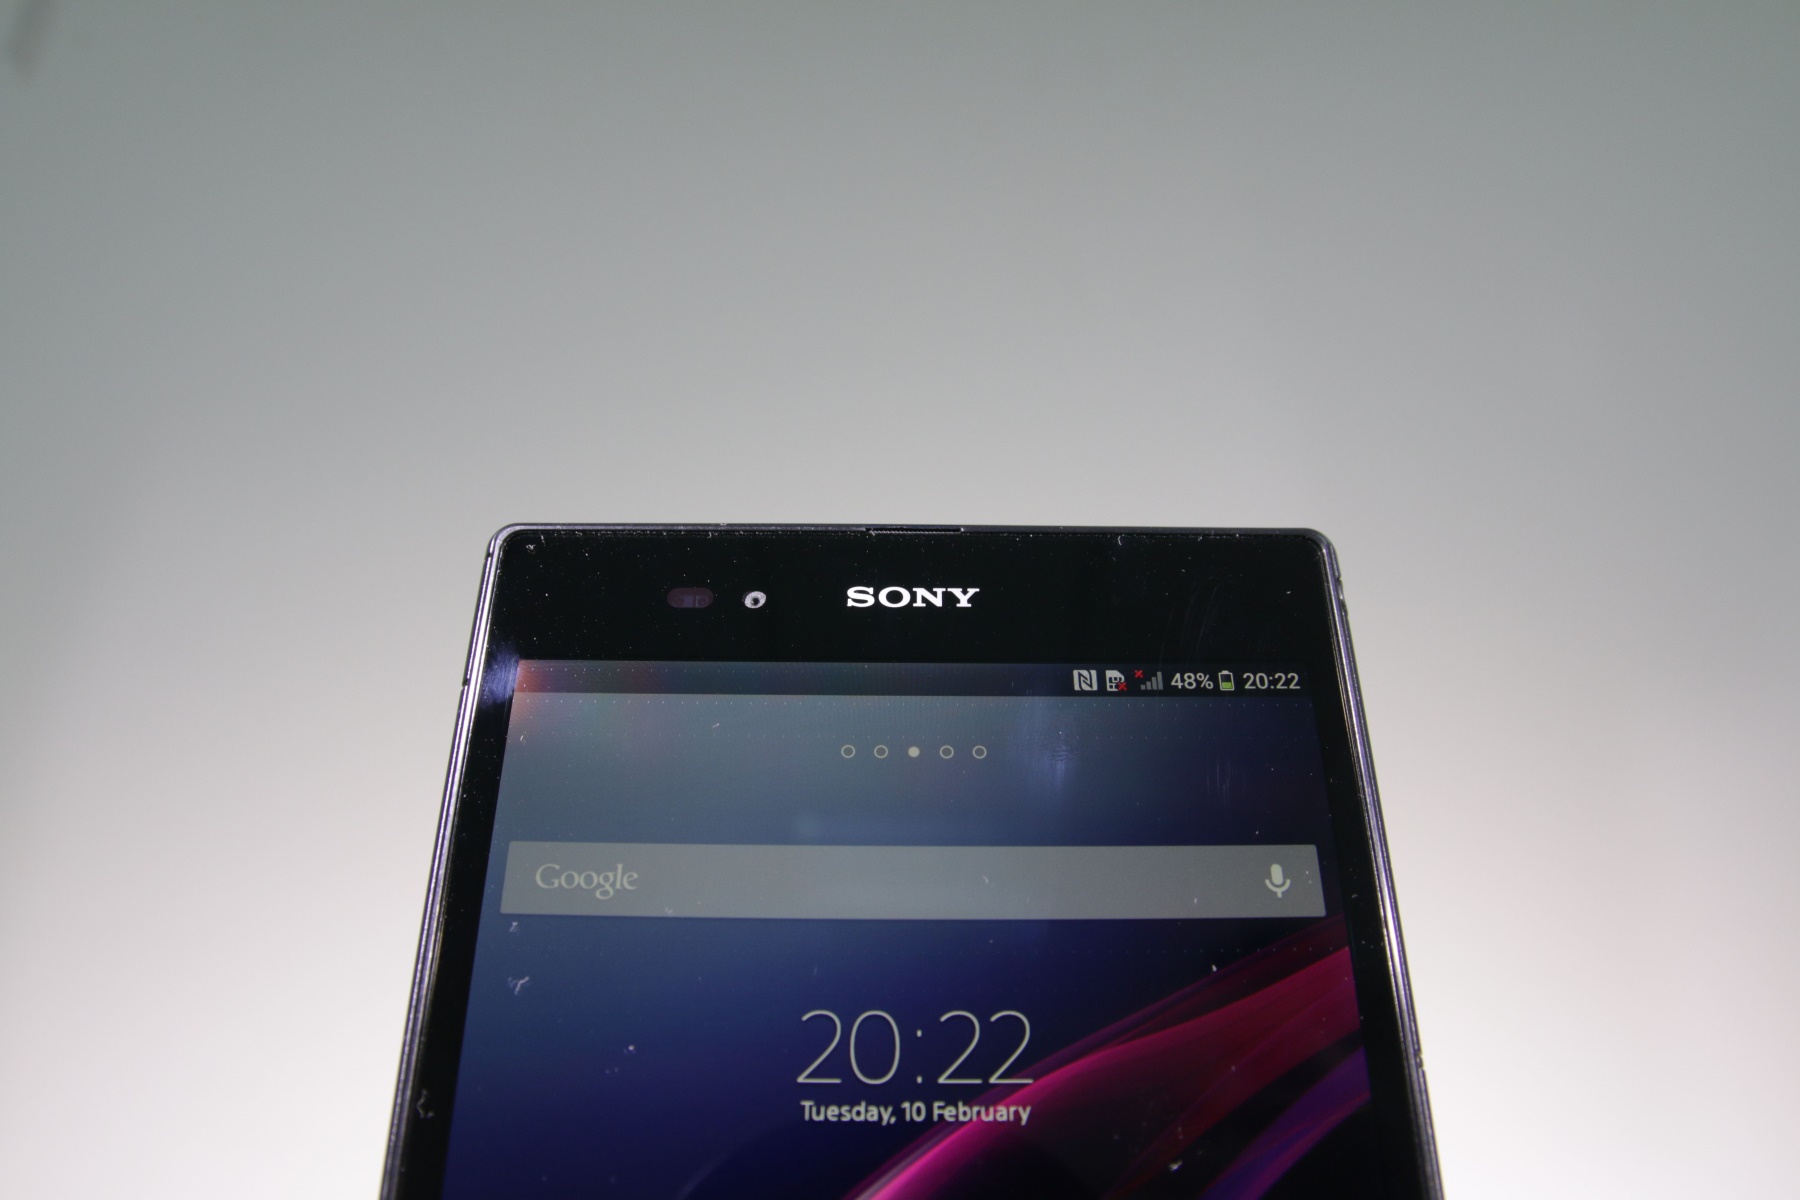 xperia-z1s-rooting-guide-unlock-new-possibilities